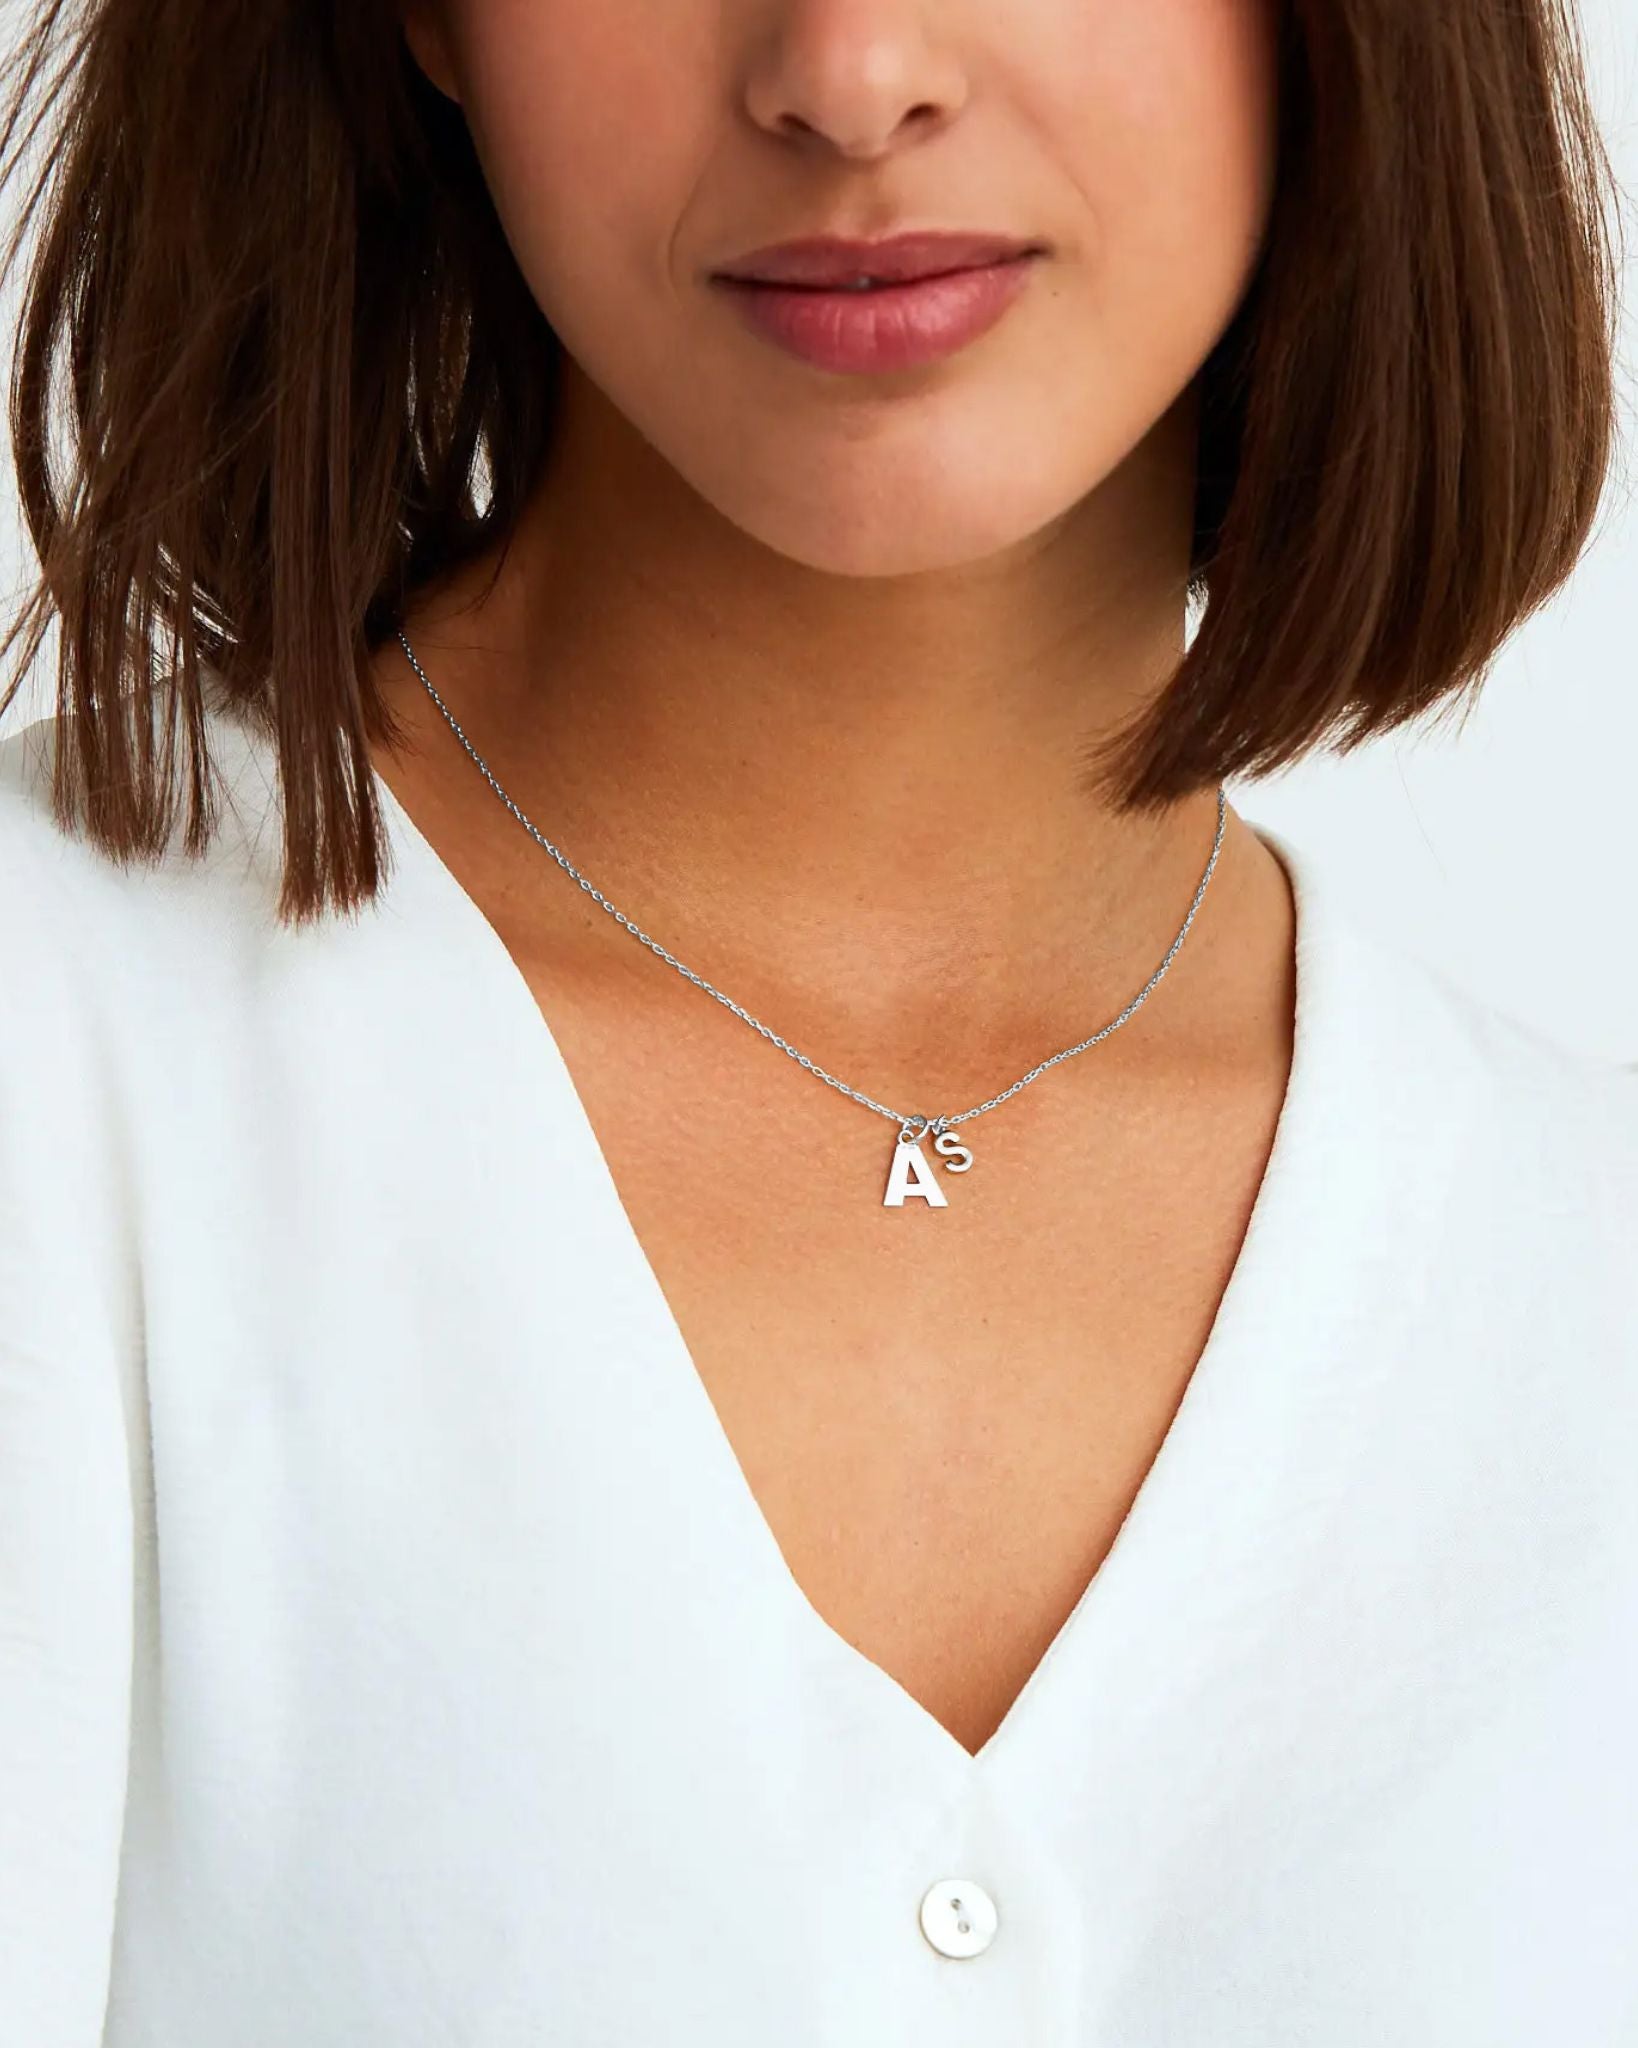 NEW - SILVER MINI INITIAL NECKLACE